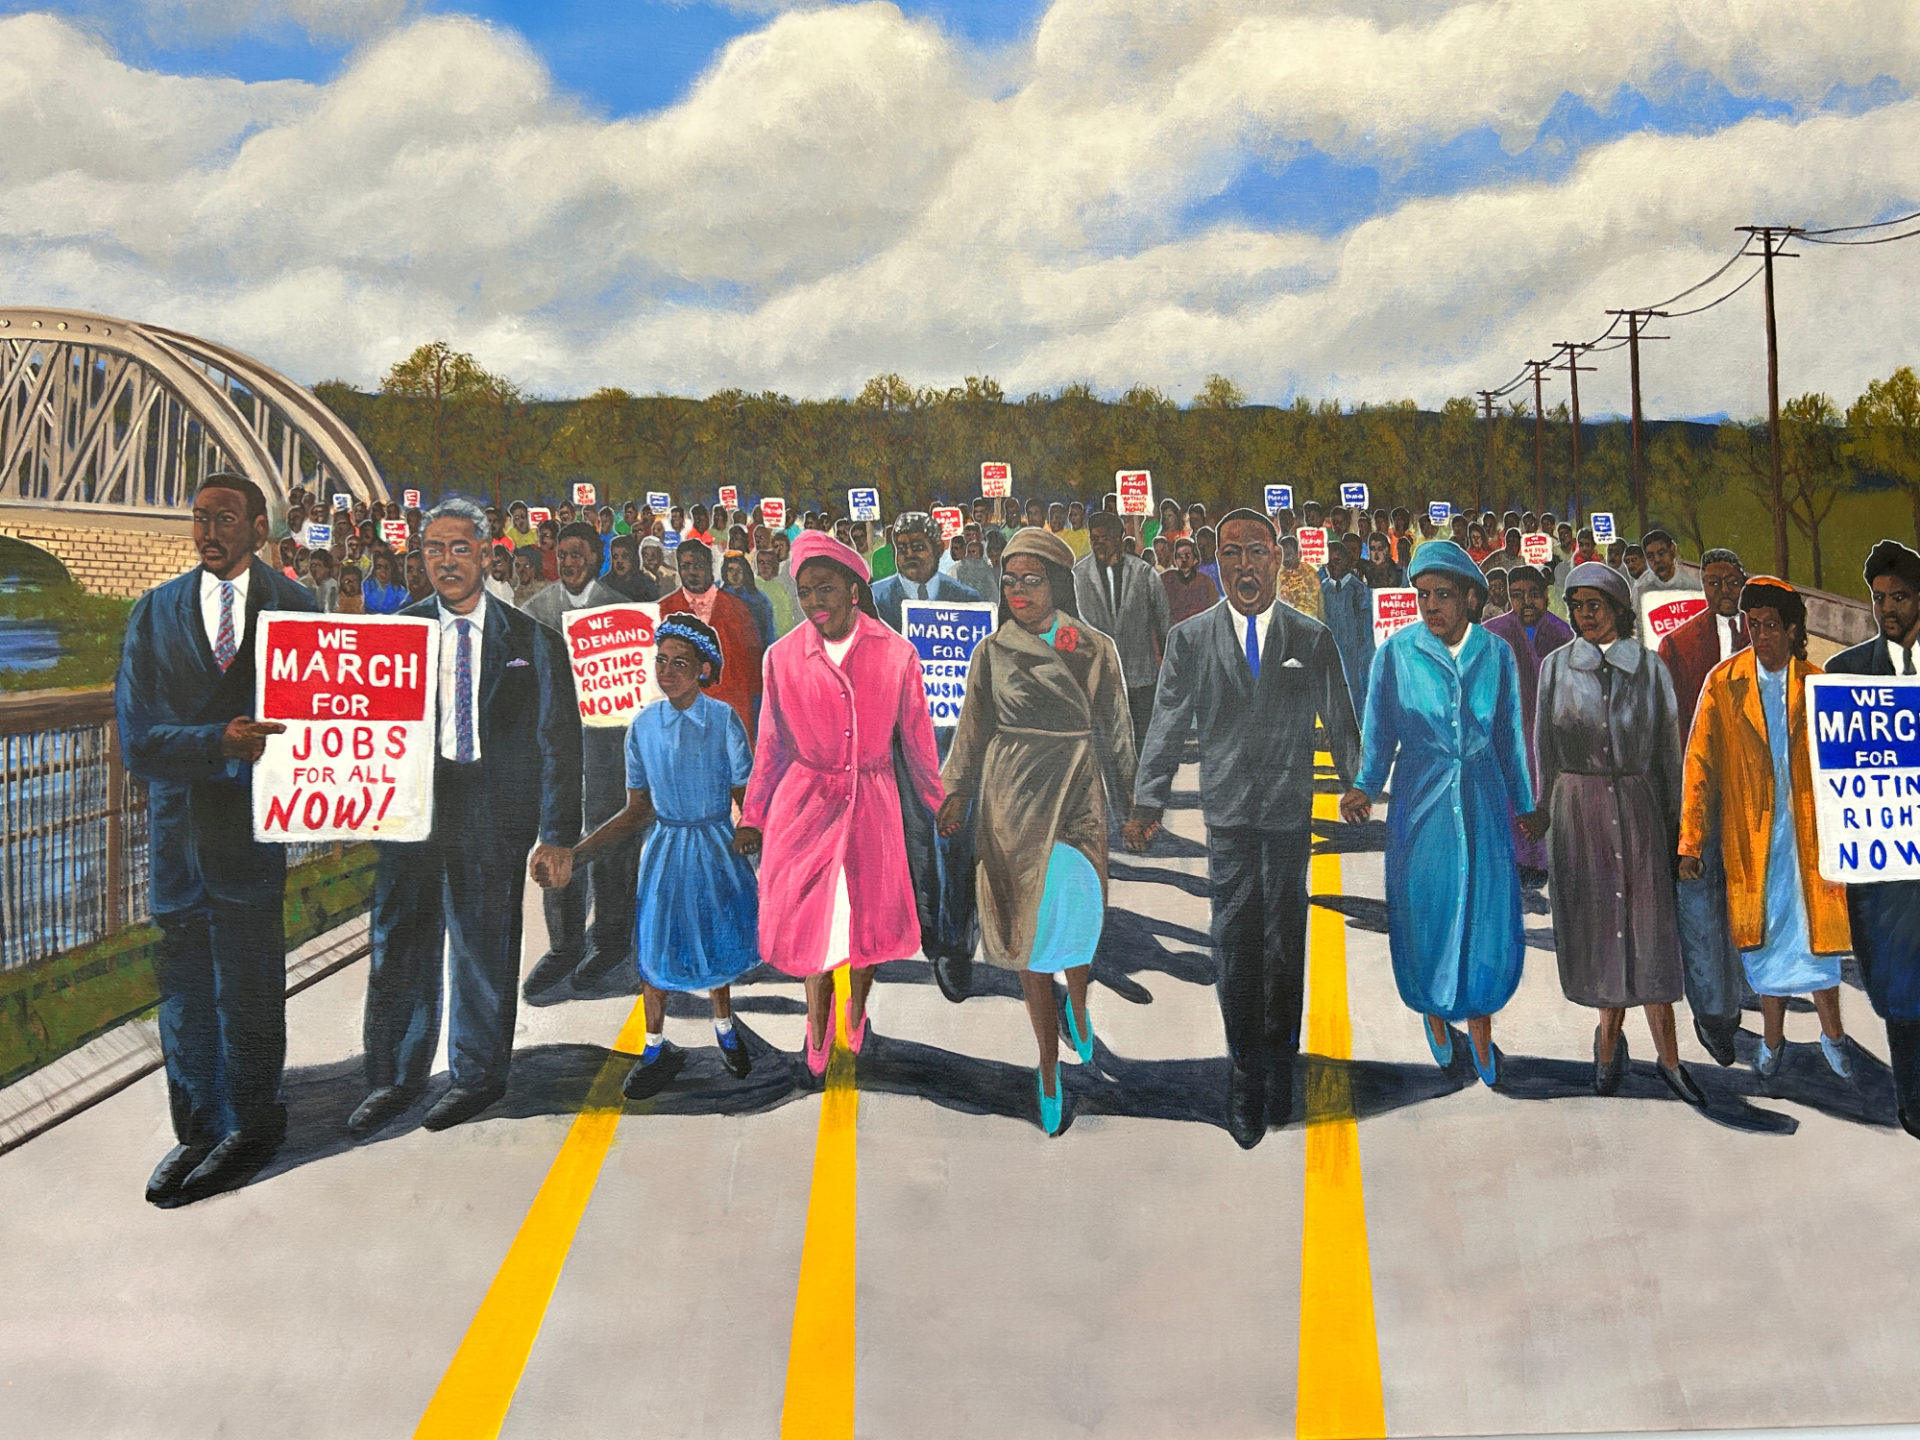 Colorful painting of the famous Selma march with drawings of the Black marchers wearing pink and blue coats, carrying signs that read "We march for jobs for all now," and "We march for voting rights now." The figures are holding hands leading the march.